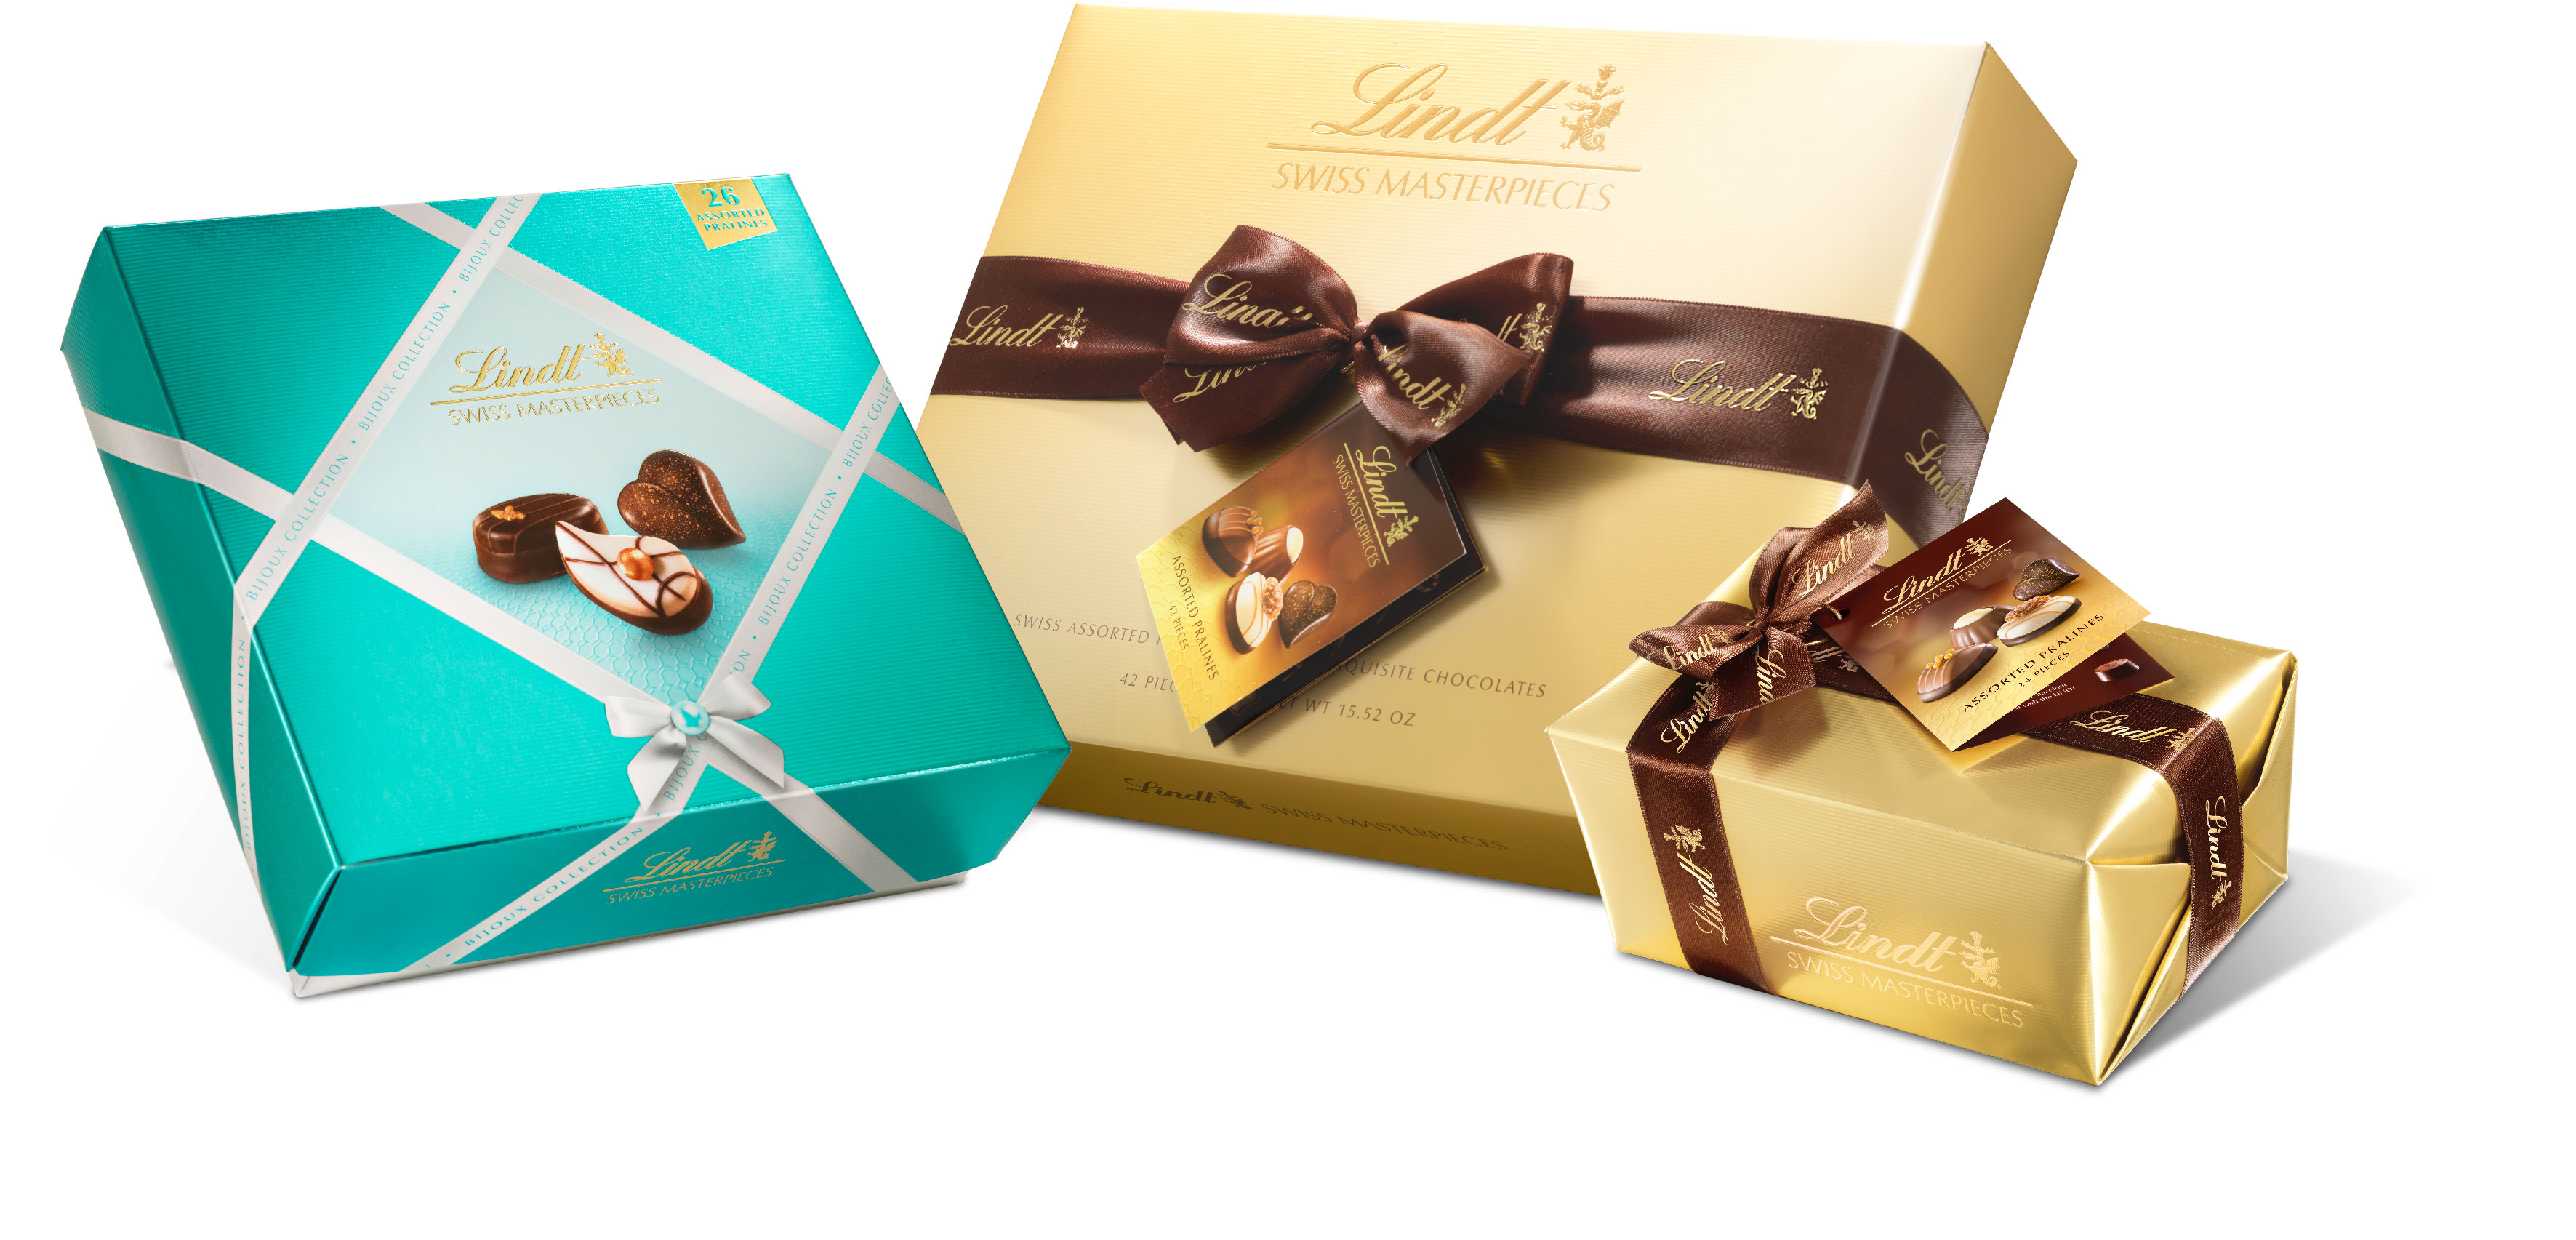 Lindt collaborates with DFS Group in HKIA store concept